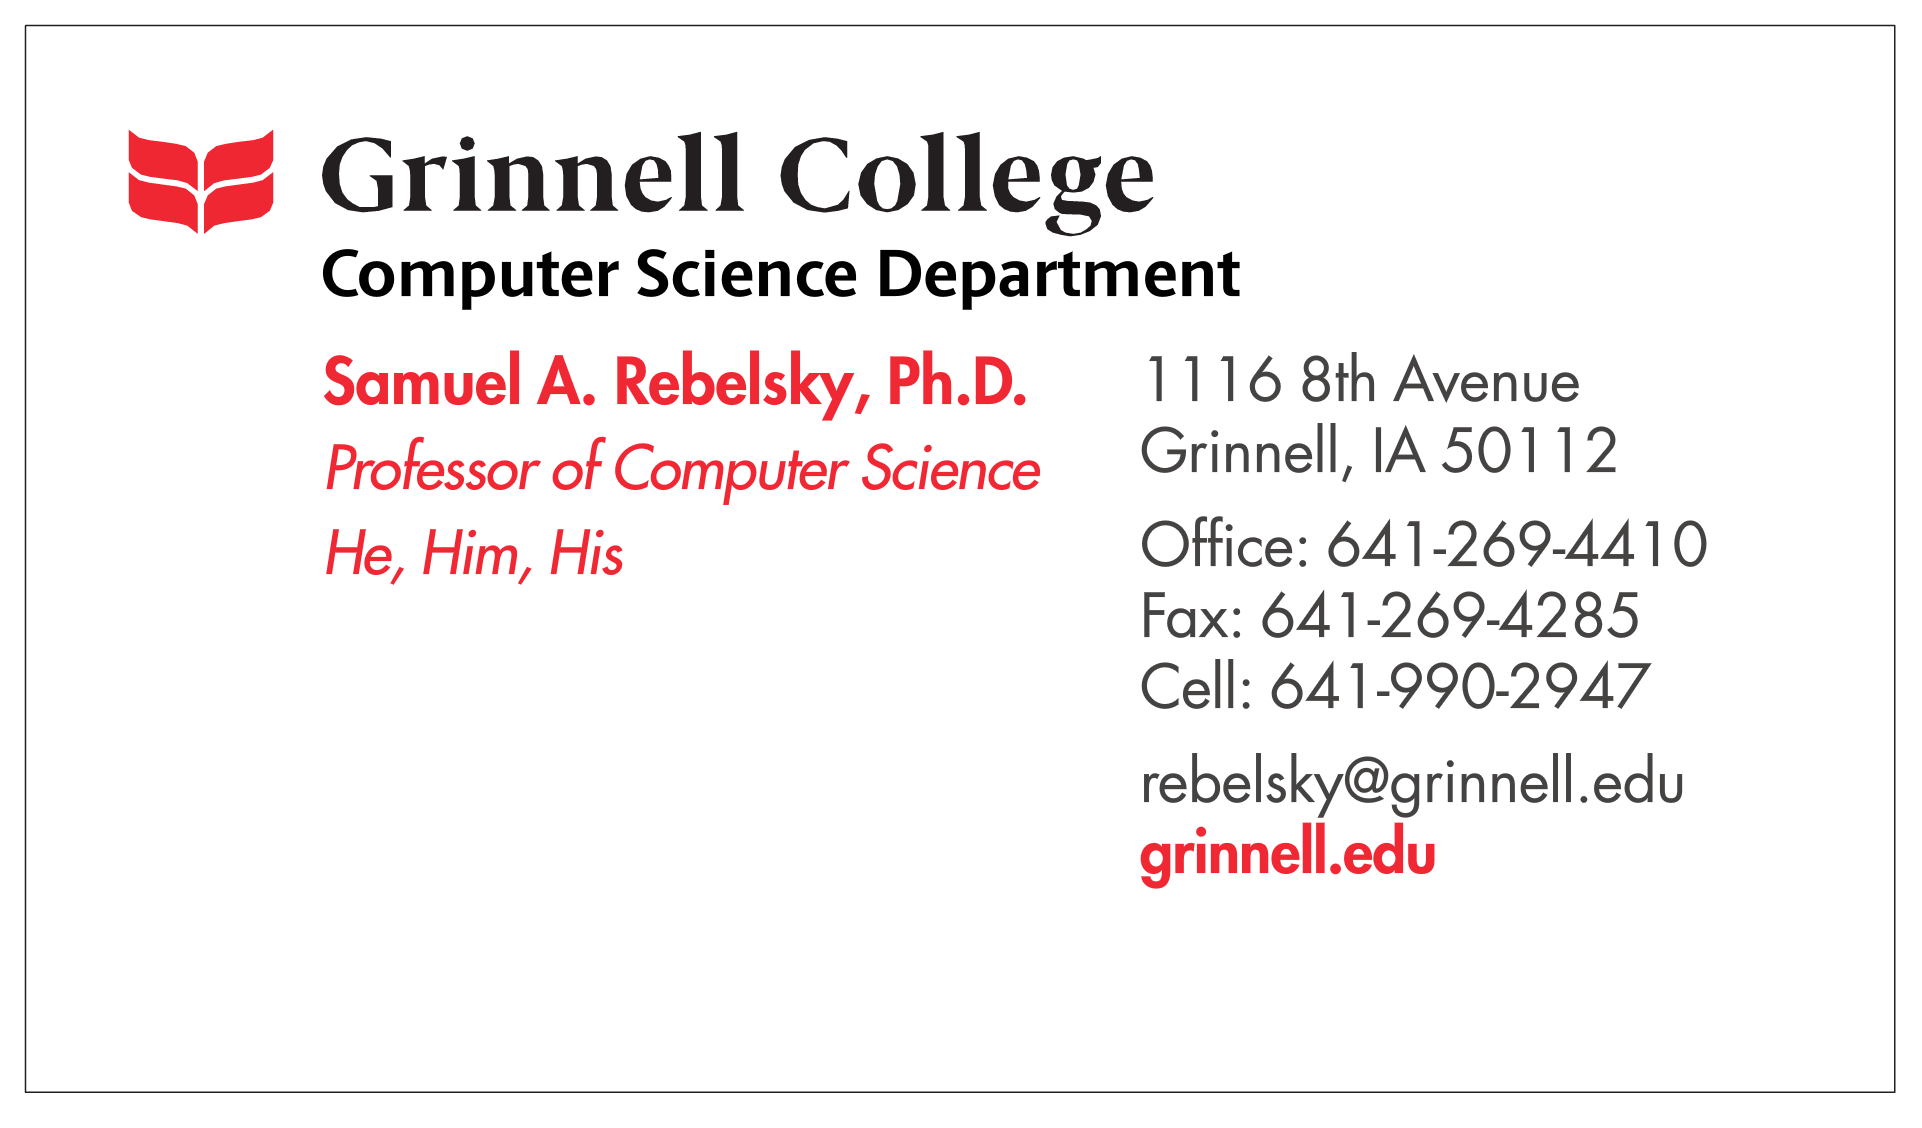 An image of a business card.  See the following text for more information.